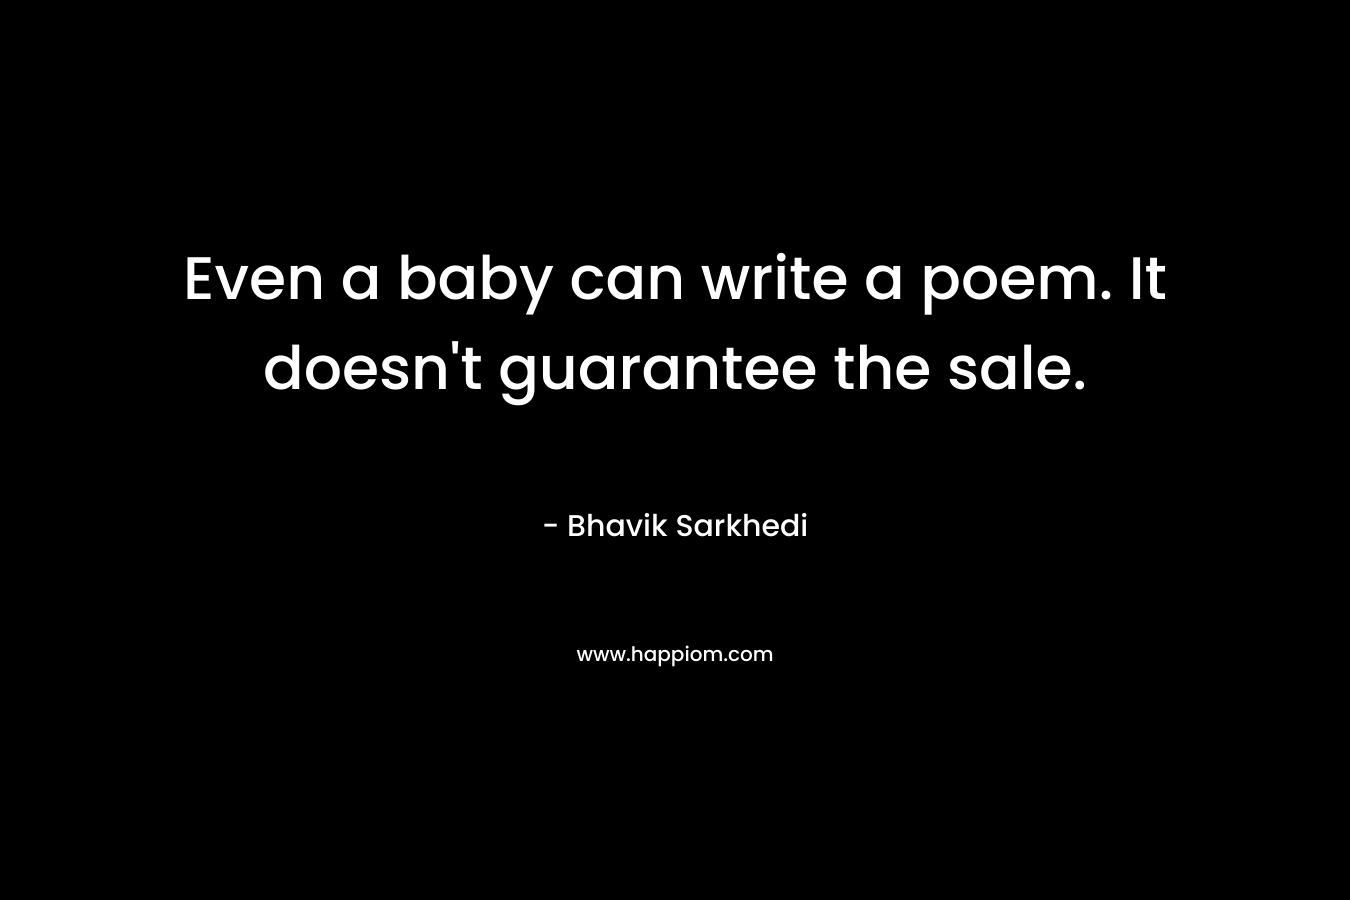 Even a baby can write a poem. It doesn’t guarantee the sale. – Bhavik Sarkhedi